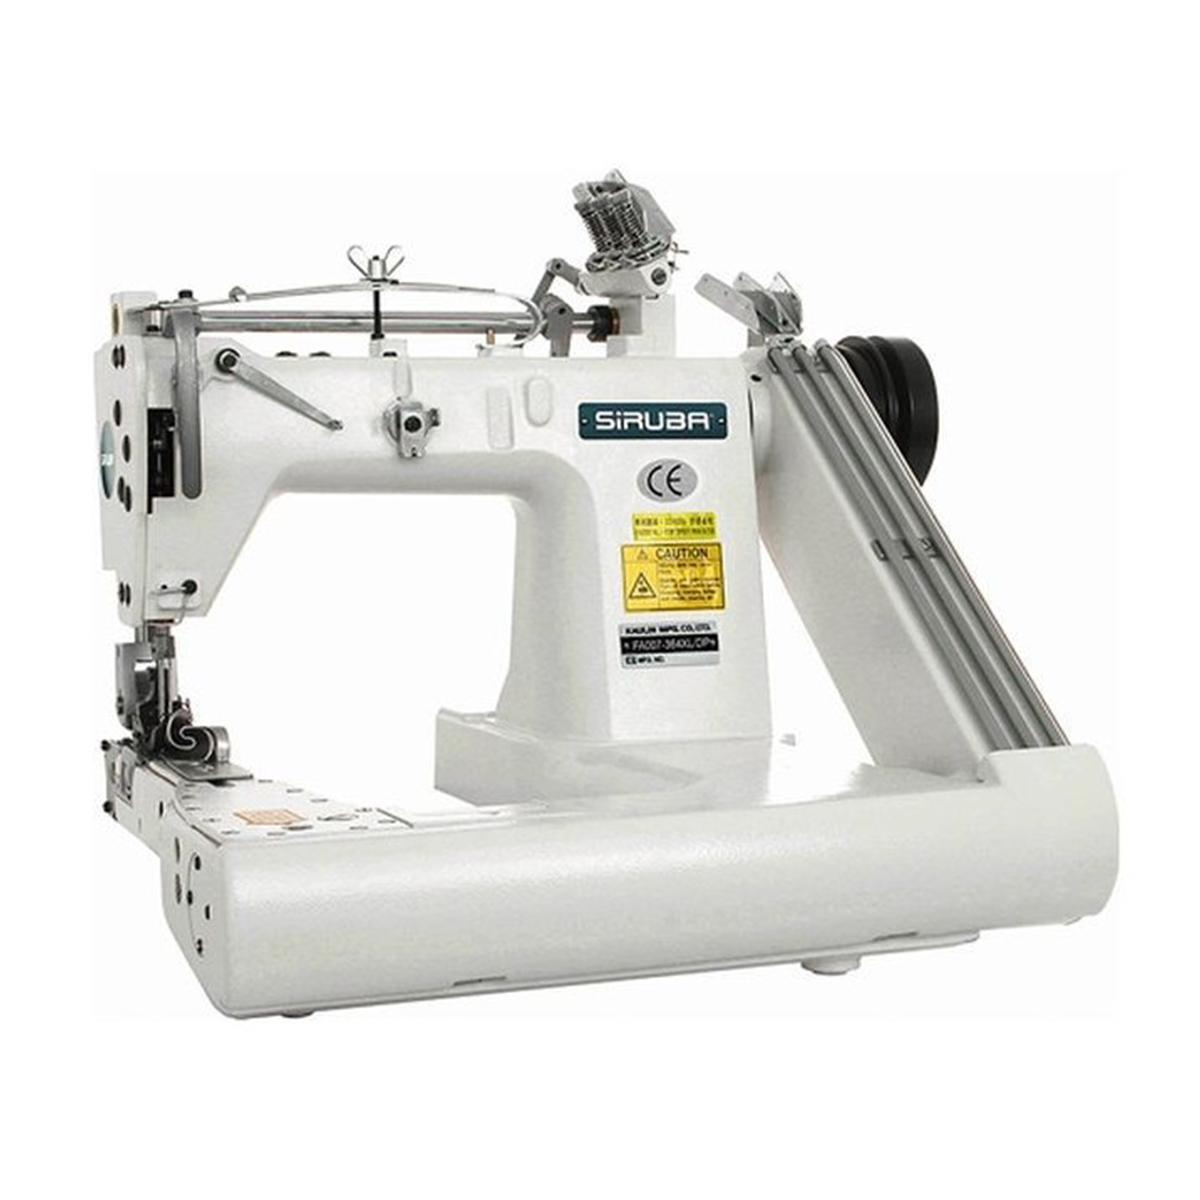 SIRUBA FA007-364XL/DP 3 Needle Feed of the Arm Chainstitch For Jeans Industrial Sewing Machine Assembled with Servo Motor, Table and Stand Included